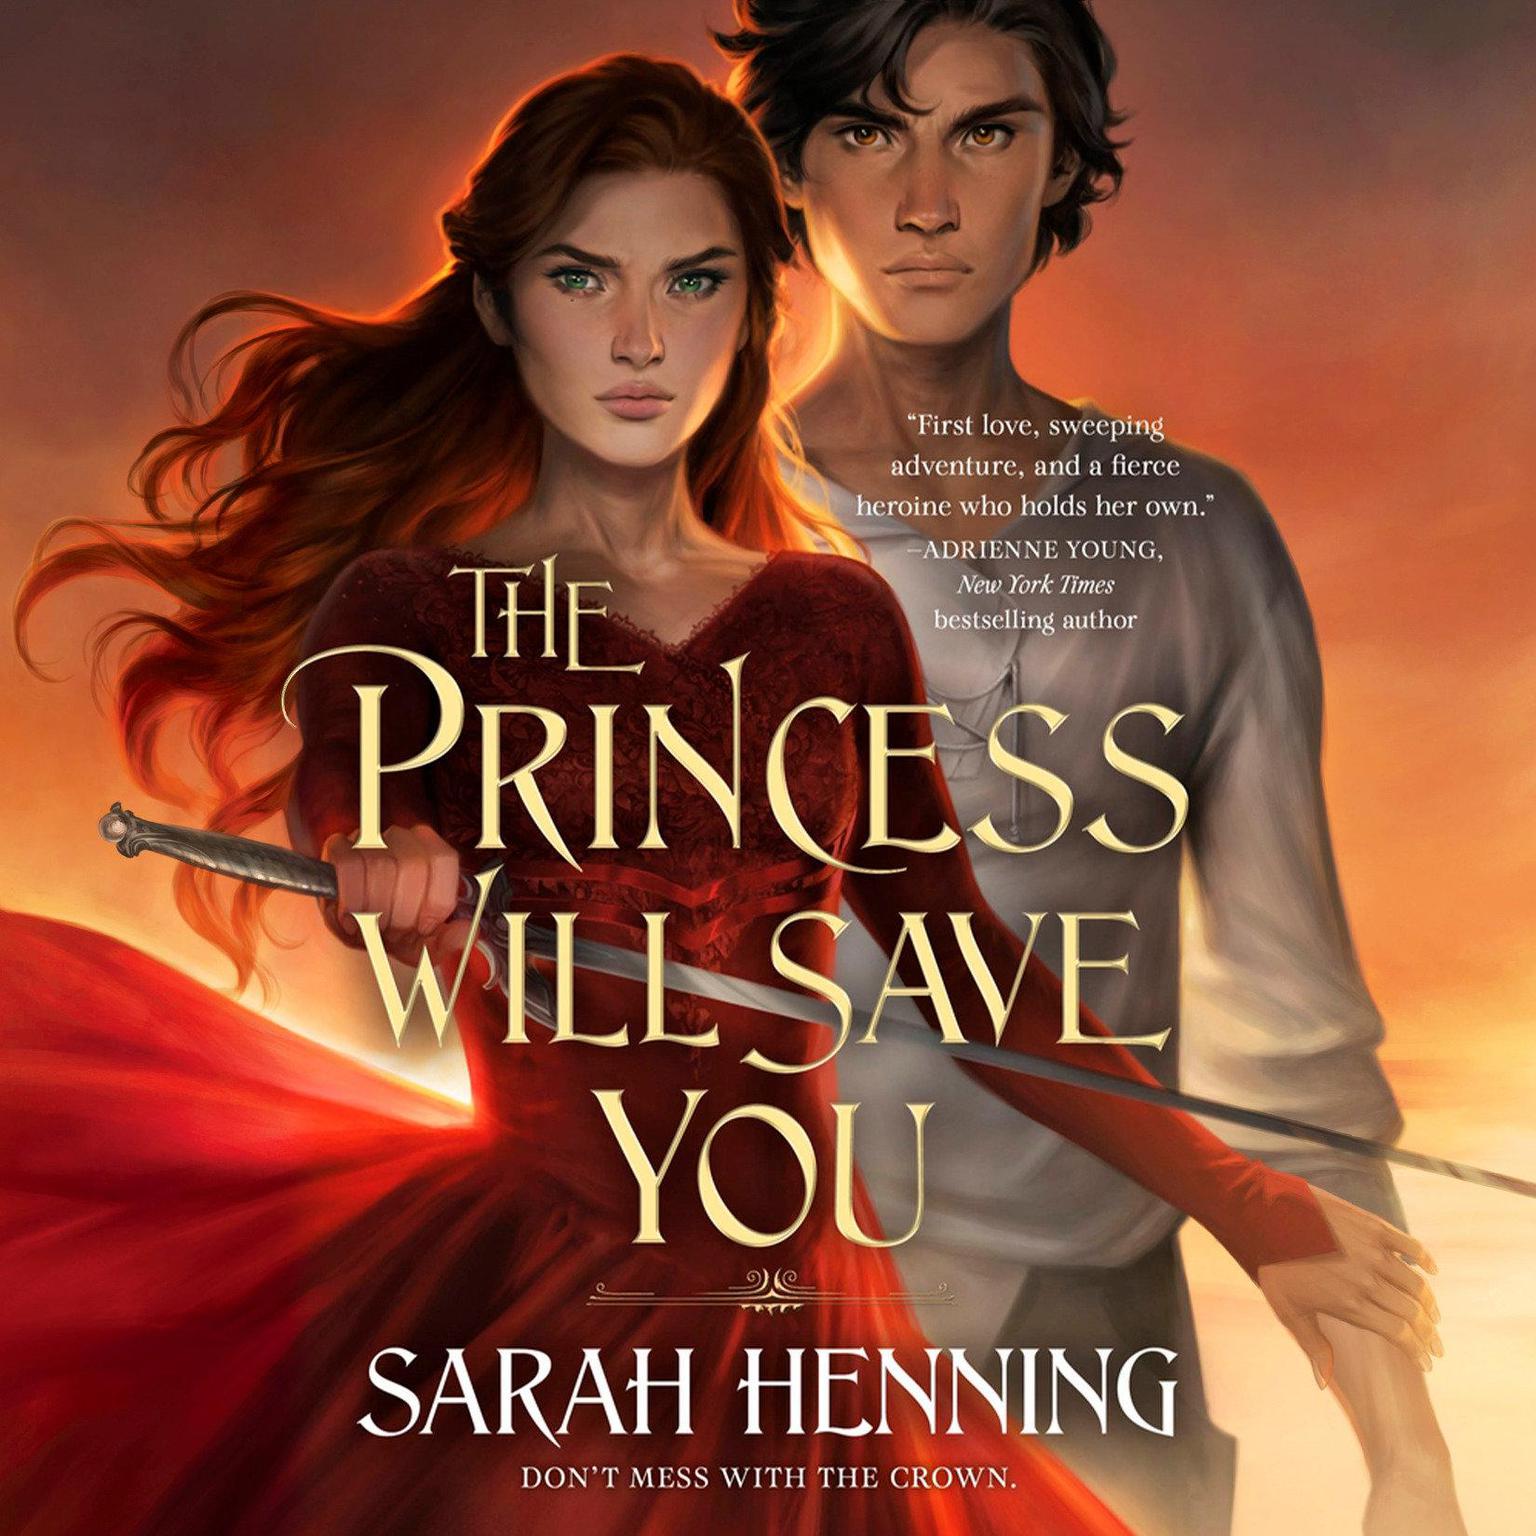 The Princess Will Save You Audiobook, by Sarah Henning